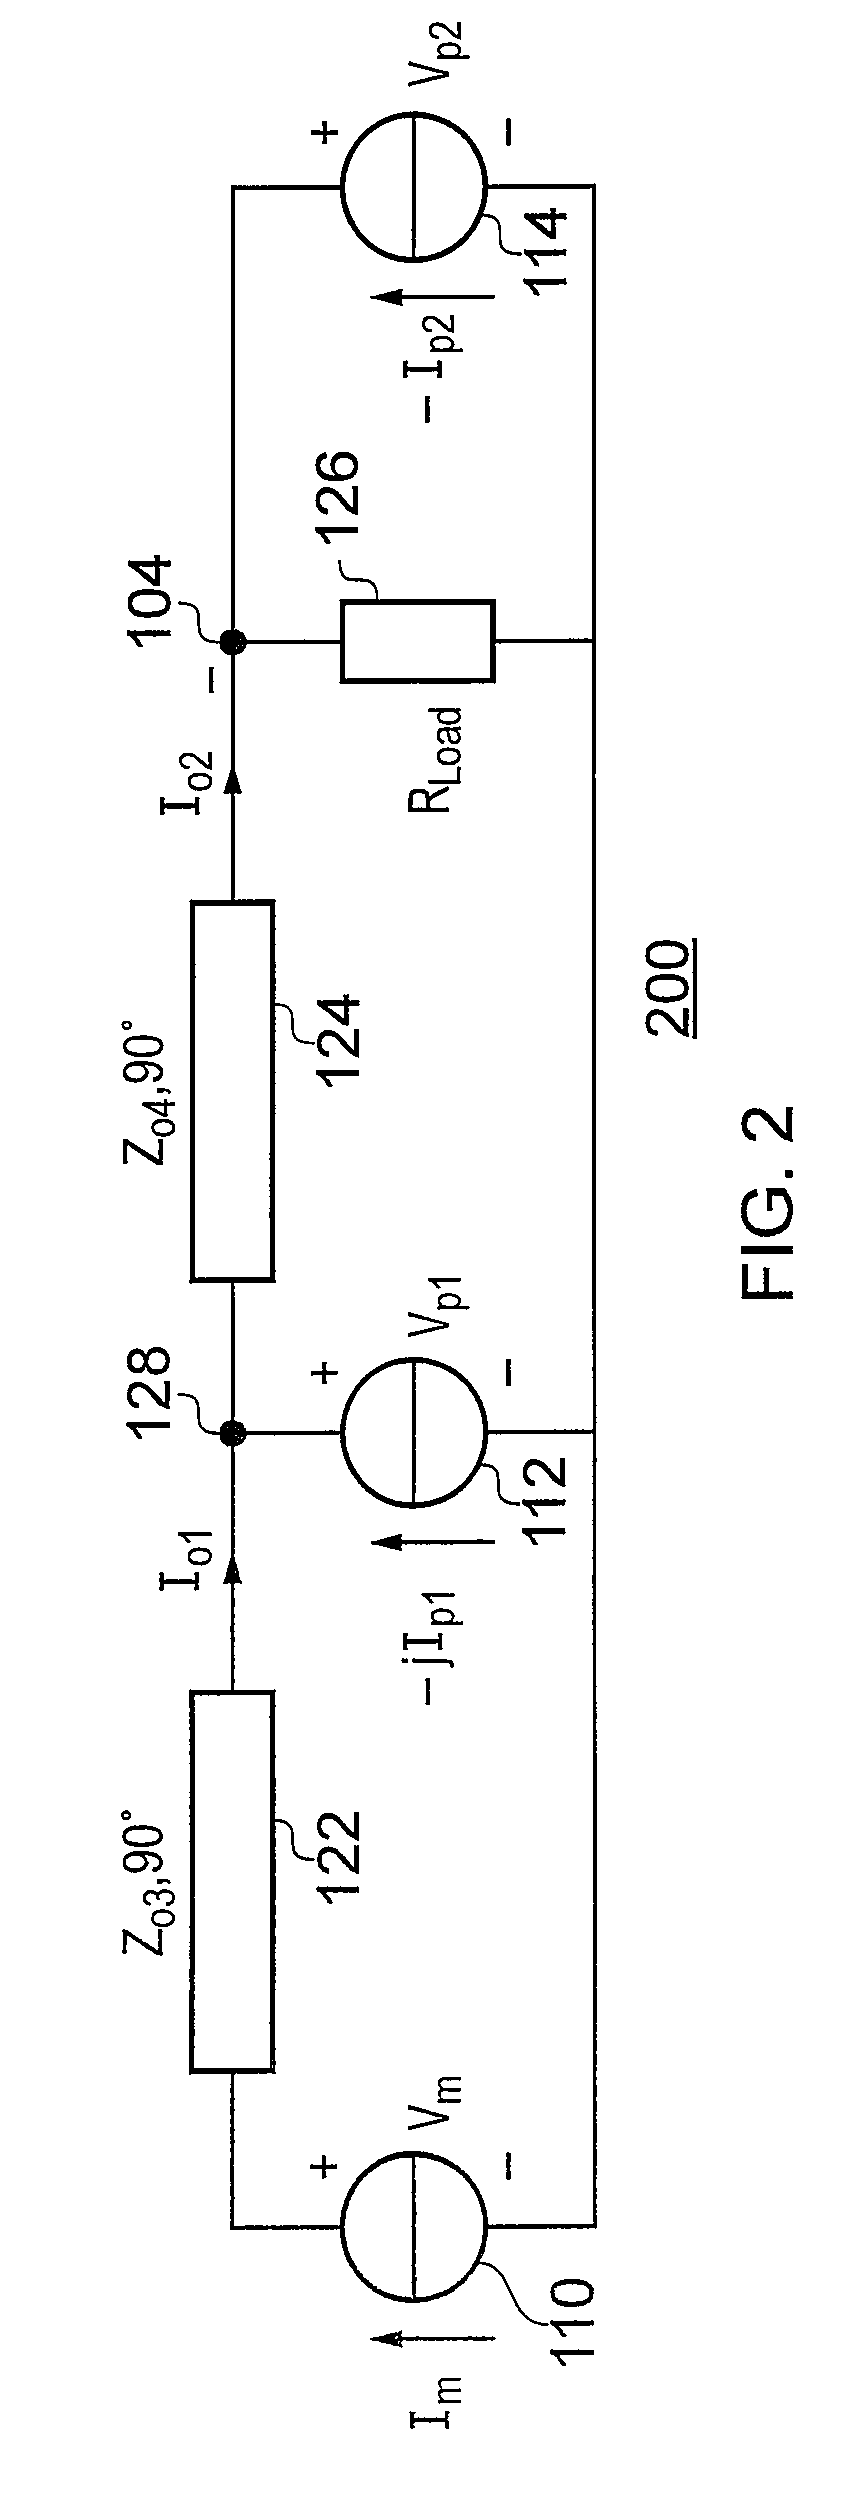 3-way Doherty amplifier with minimum output network